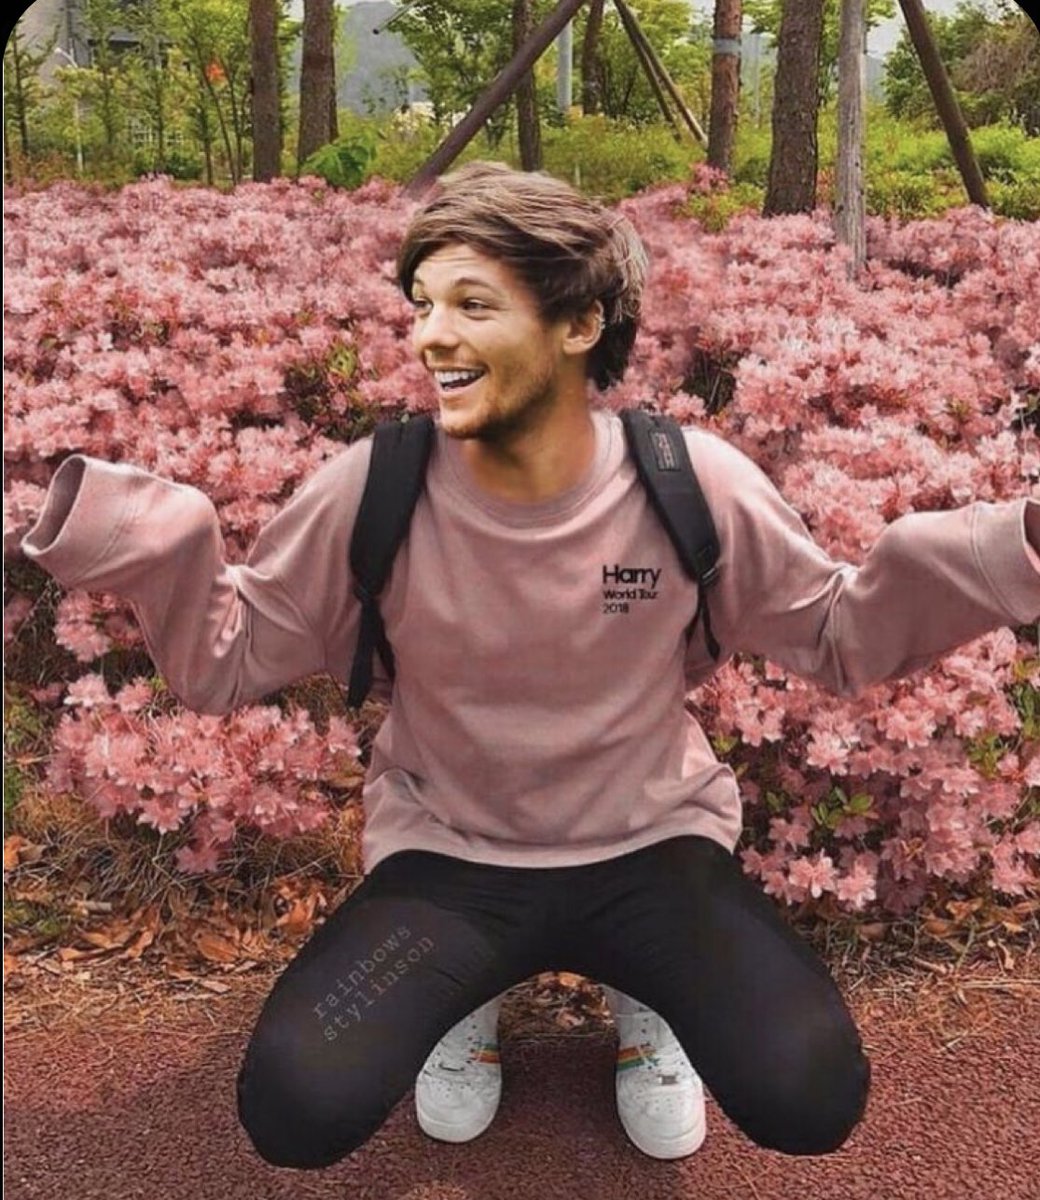 louis’ team is not promoting him at all and it’s disgusting. syco just wants to get at him one more time. long story short STREAM WALLS!! look through this thread of cute pictures of louis while you STREAM WALLS!!